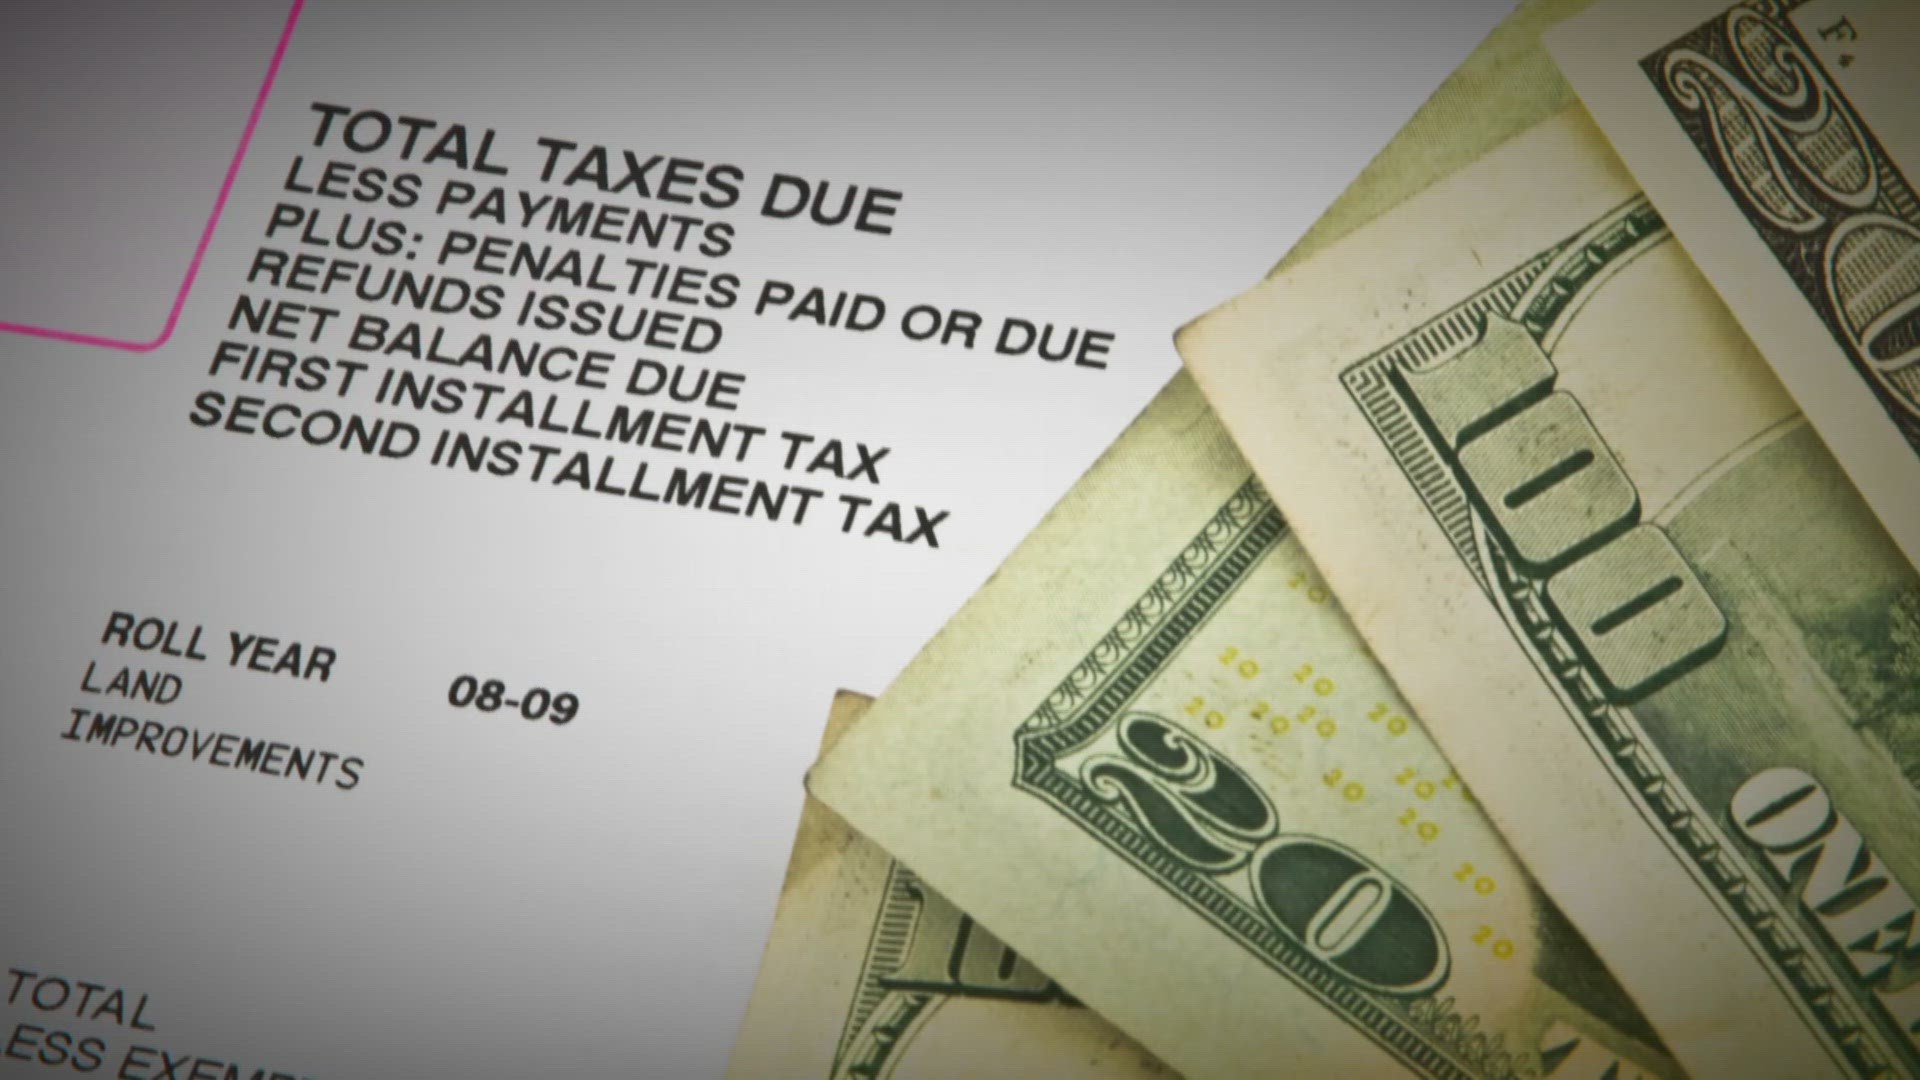 Property taxes are due in a couple of weeks, but those bills still haven't been sent out.